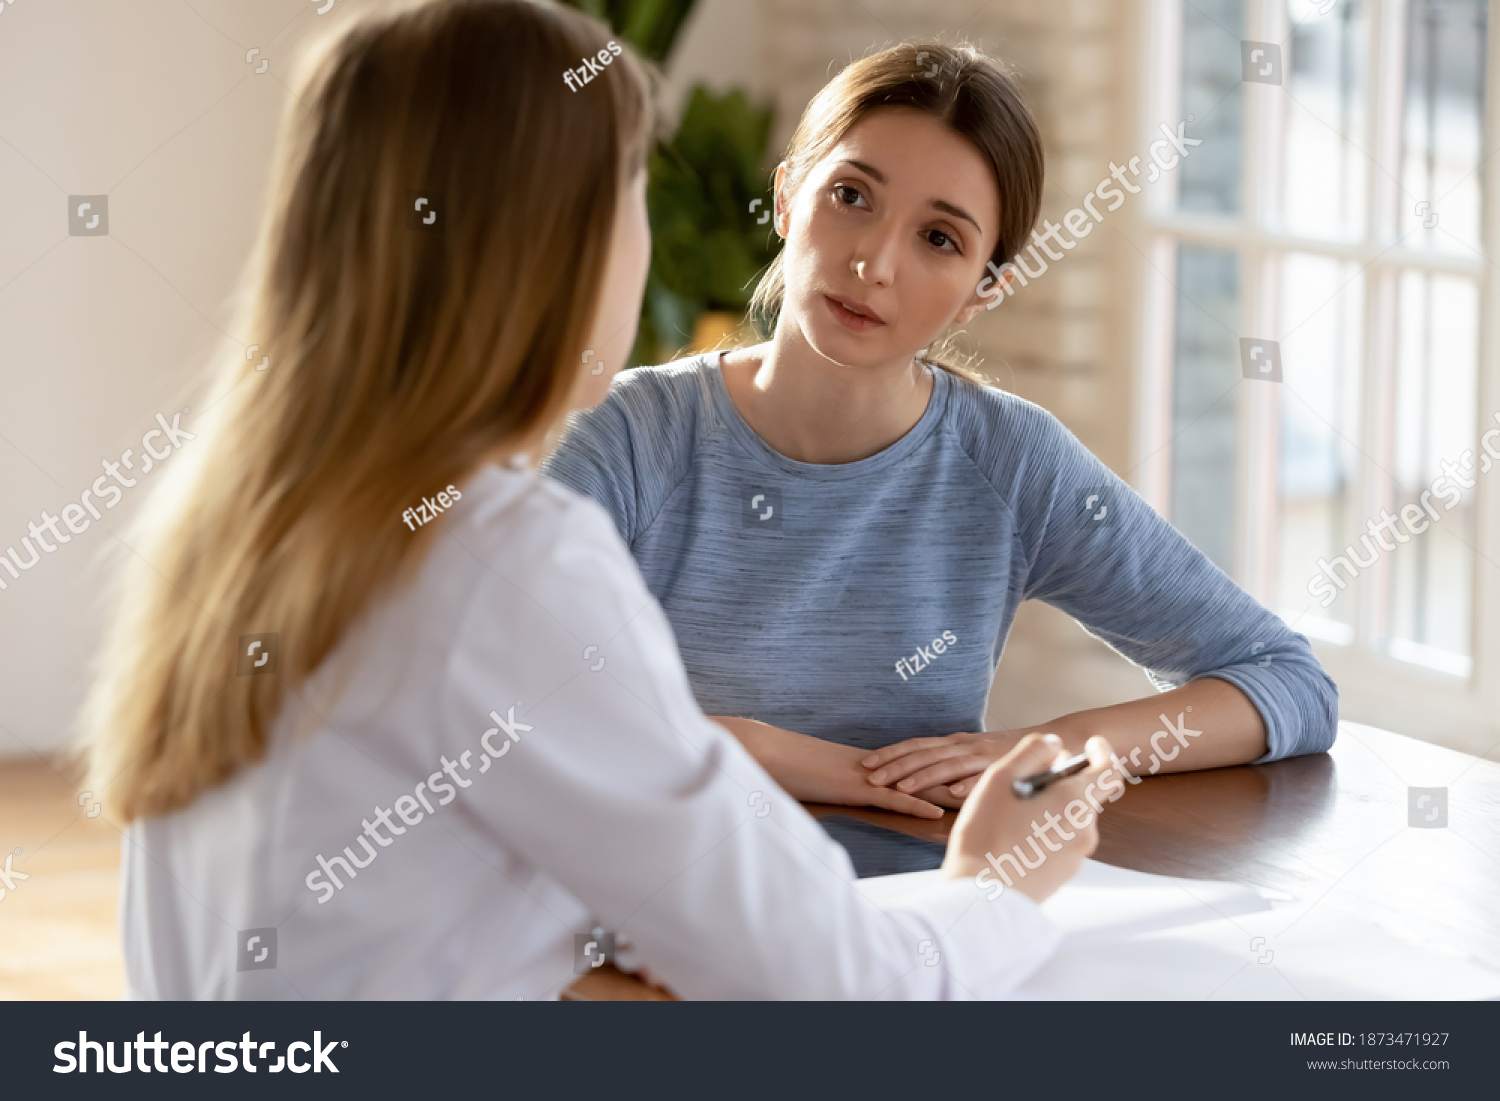 Young Caucasian female patient talk with nurse or GP at consultation in private hospital. Worried millennial woman consult speak with doctor in white medical uniform in clinic. Healthcare concept. #1873471927